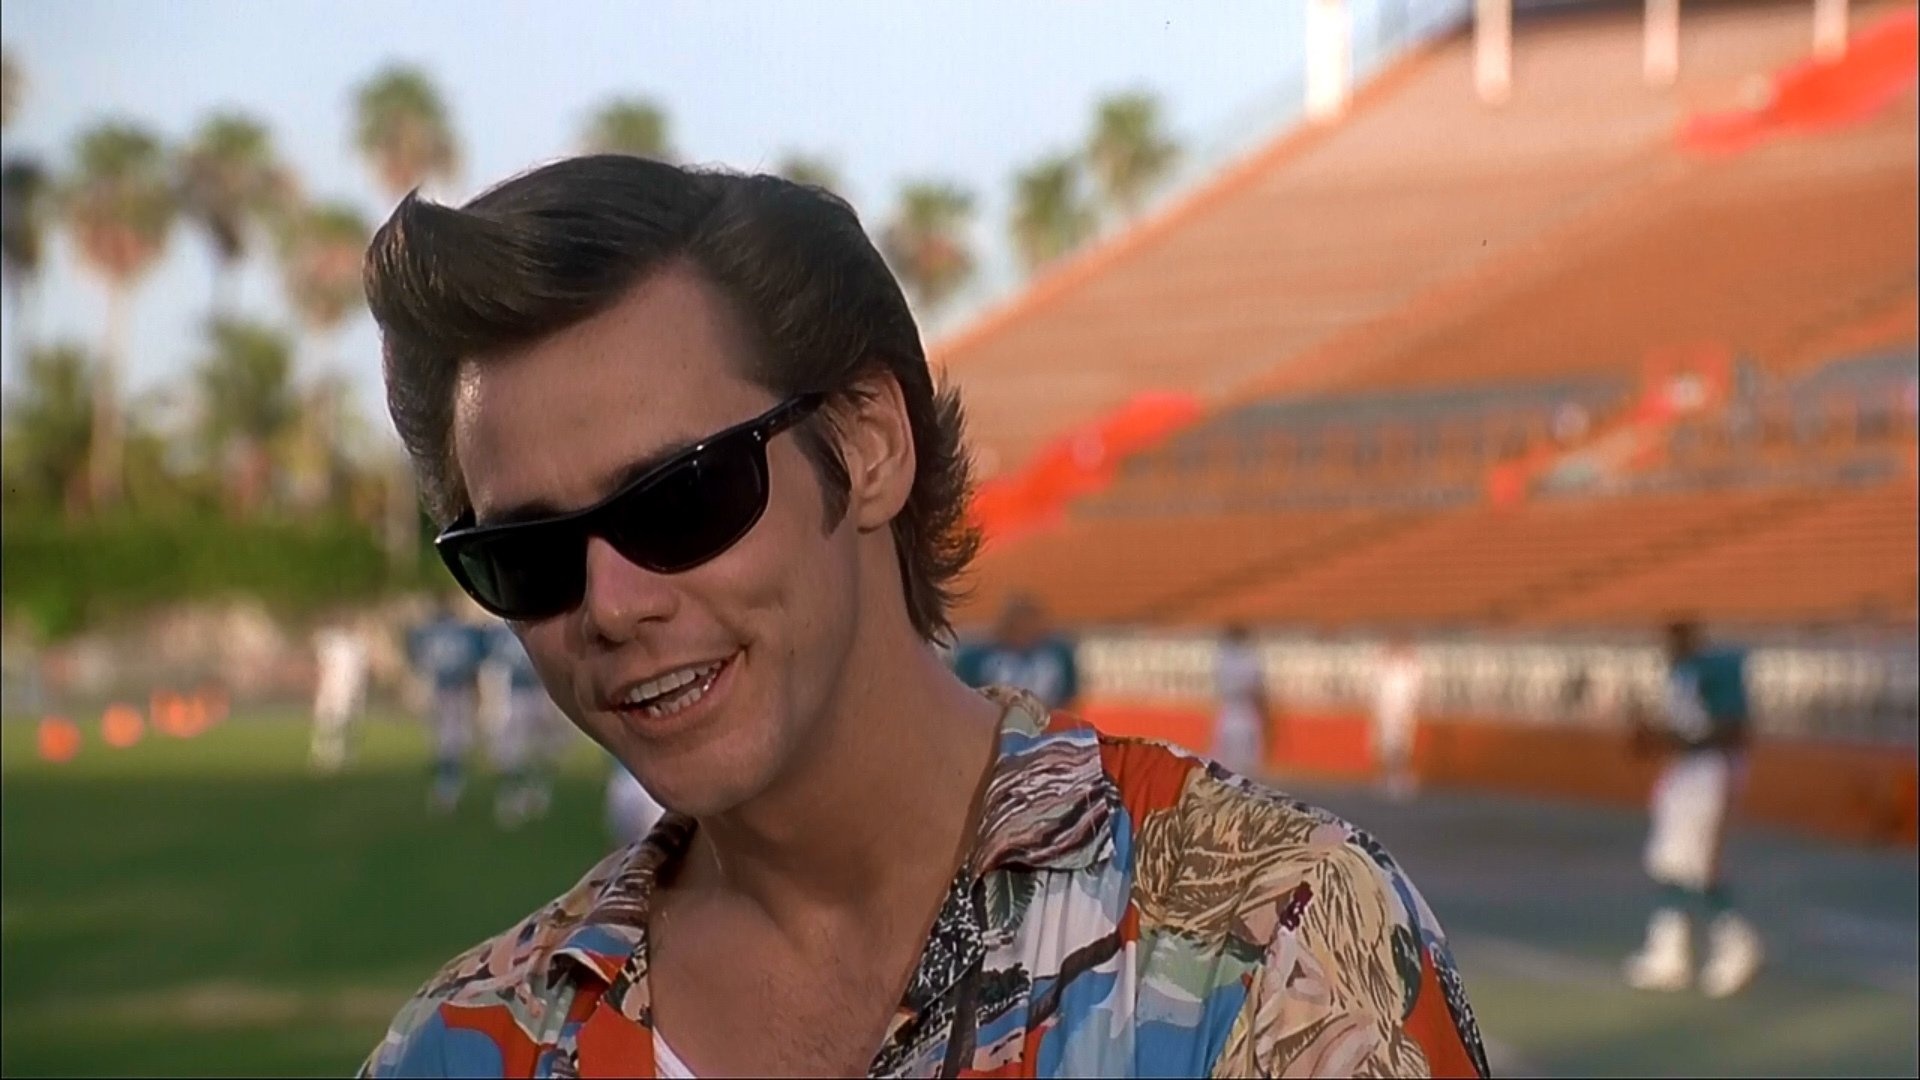 Ace Ventura: An animal detective who is tasked with finding the abducted dolphin mascot of the Miami Dolphins football team. 1920x1080 Full HD Background.